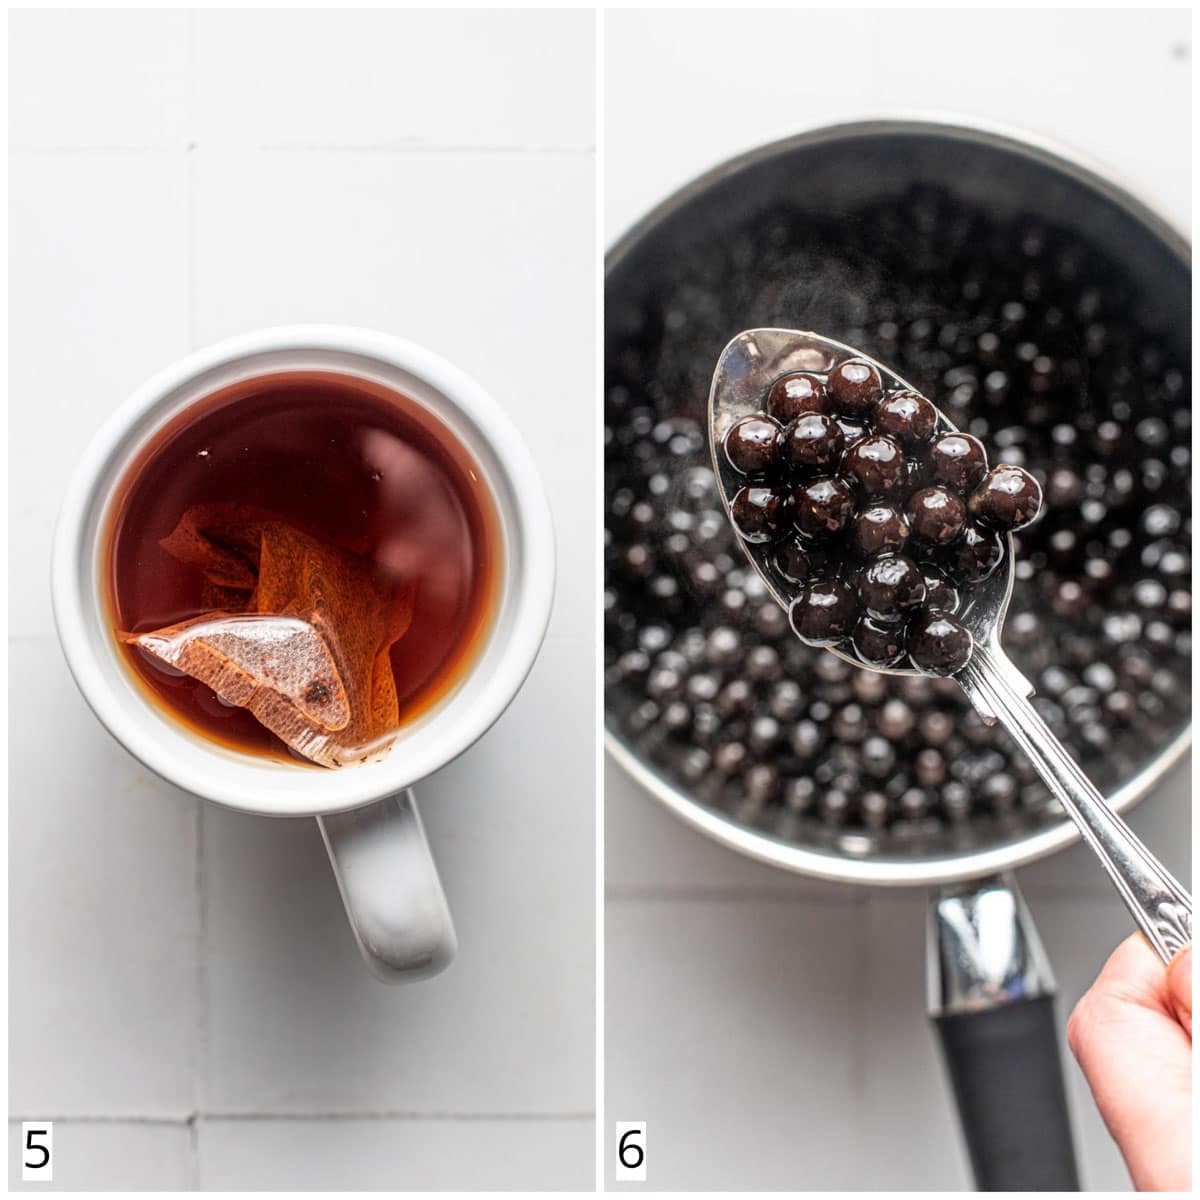 A collage of two images showing a mug of tea and cooked tapioca pearls.